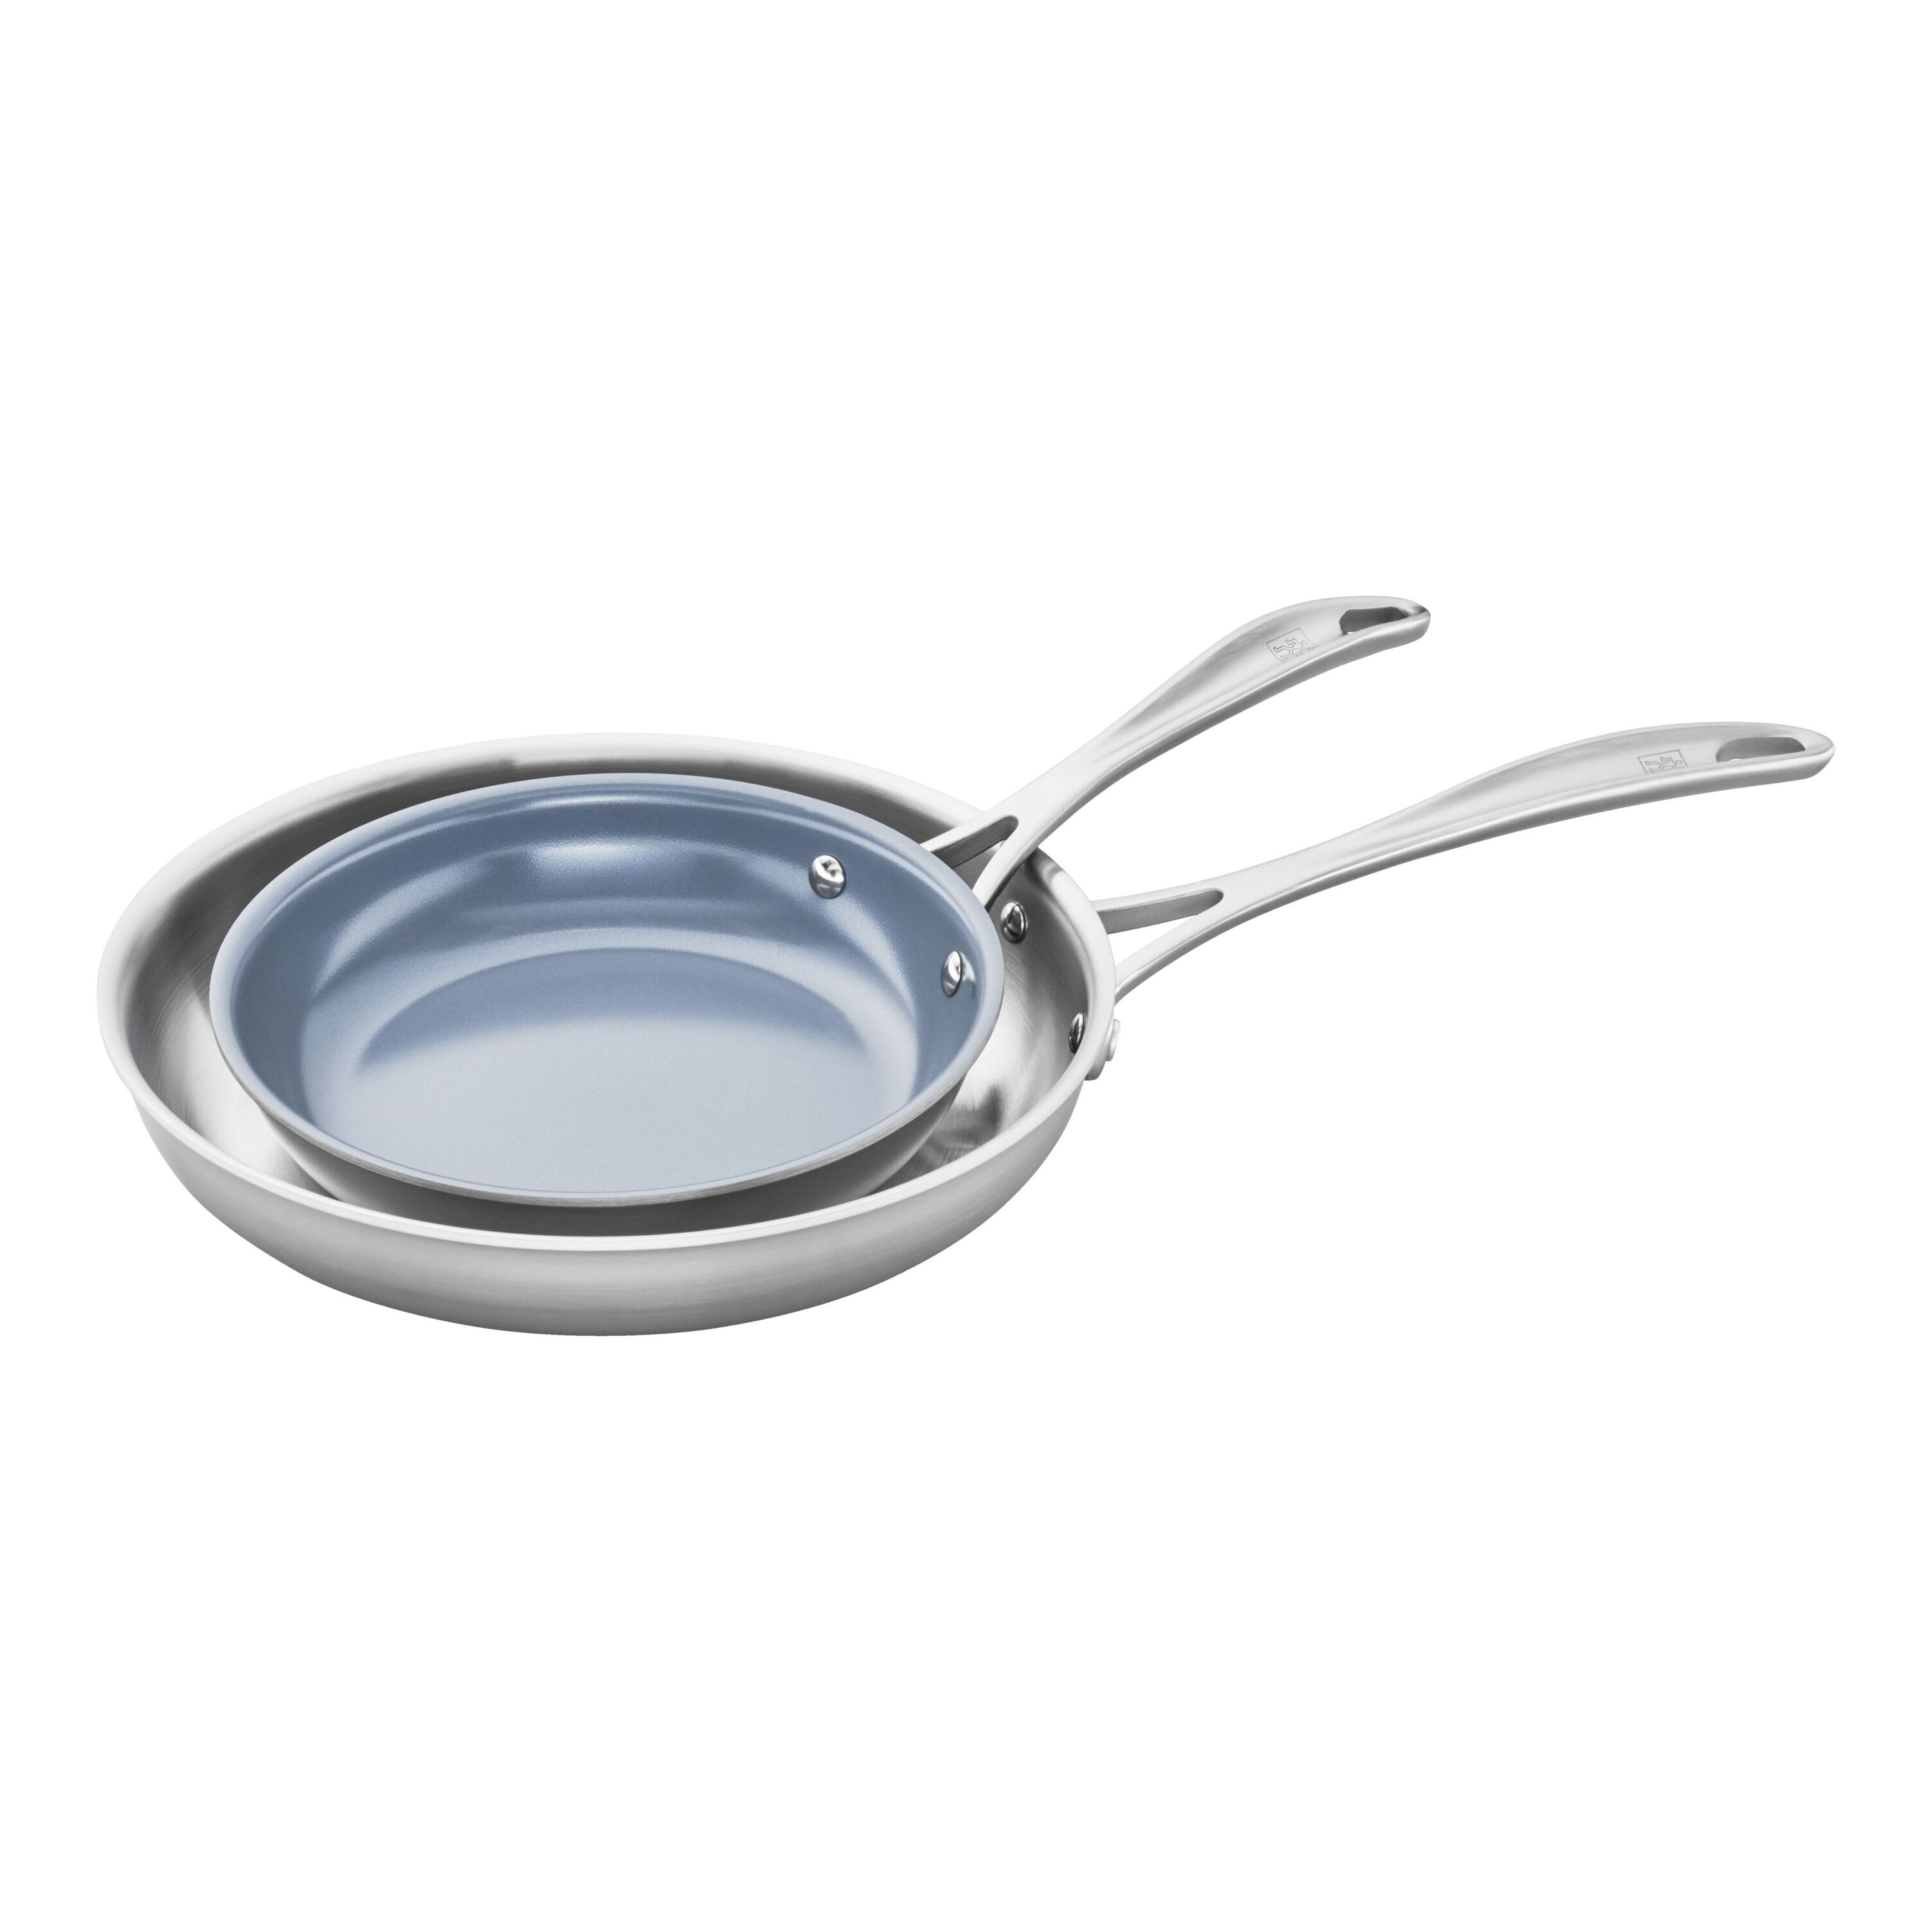 ZWILLING Spirit 3-ply 14-inch Stainless Steel Ceramic Nonstick Fry Pan